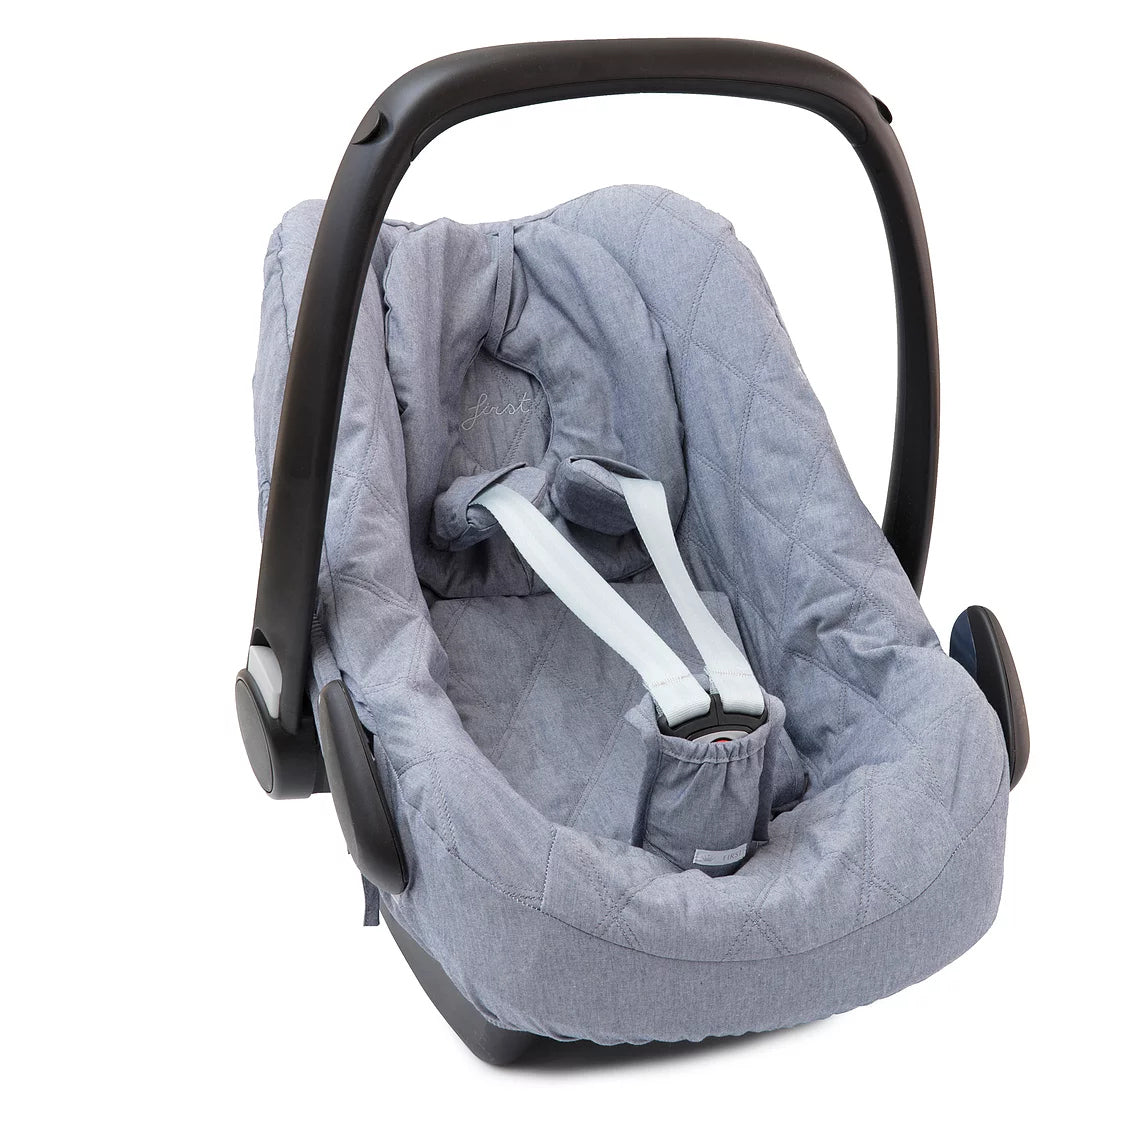 First True Blue Cover for Maxicosi Car Seat